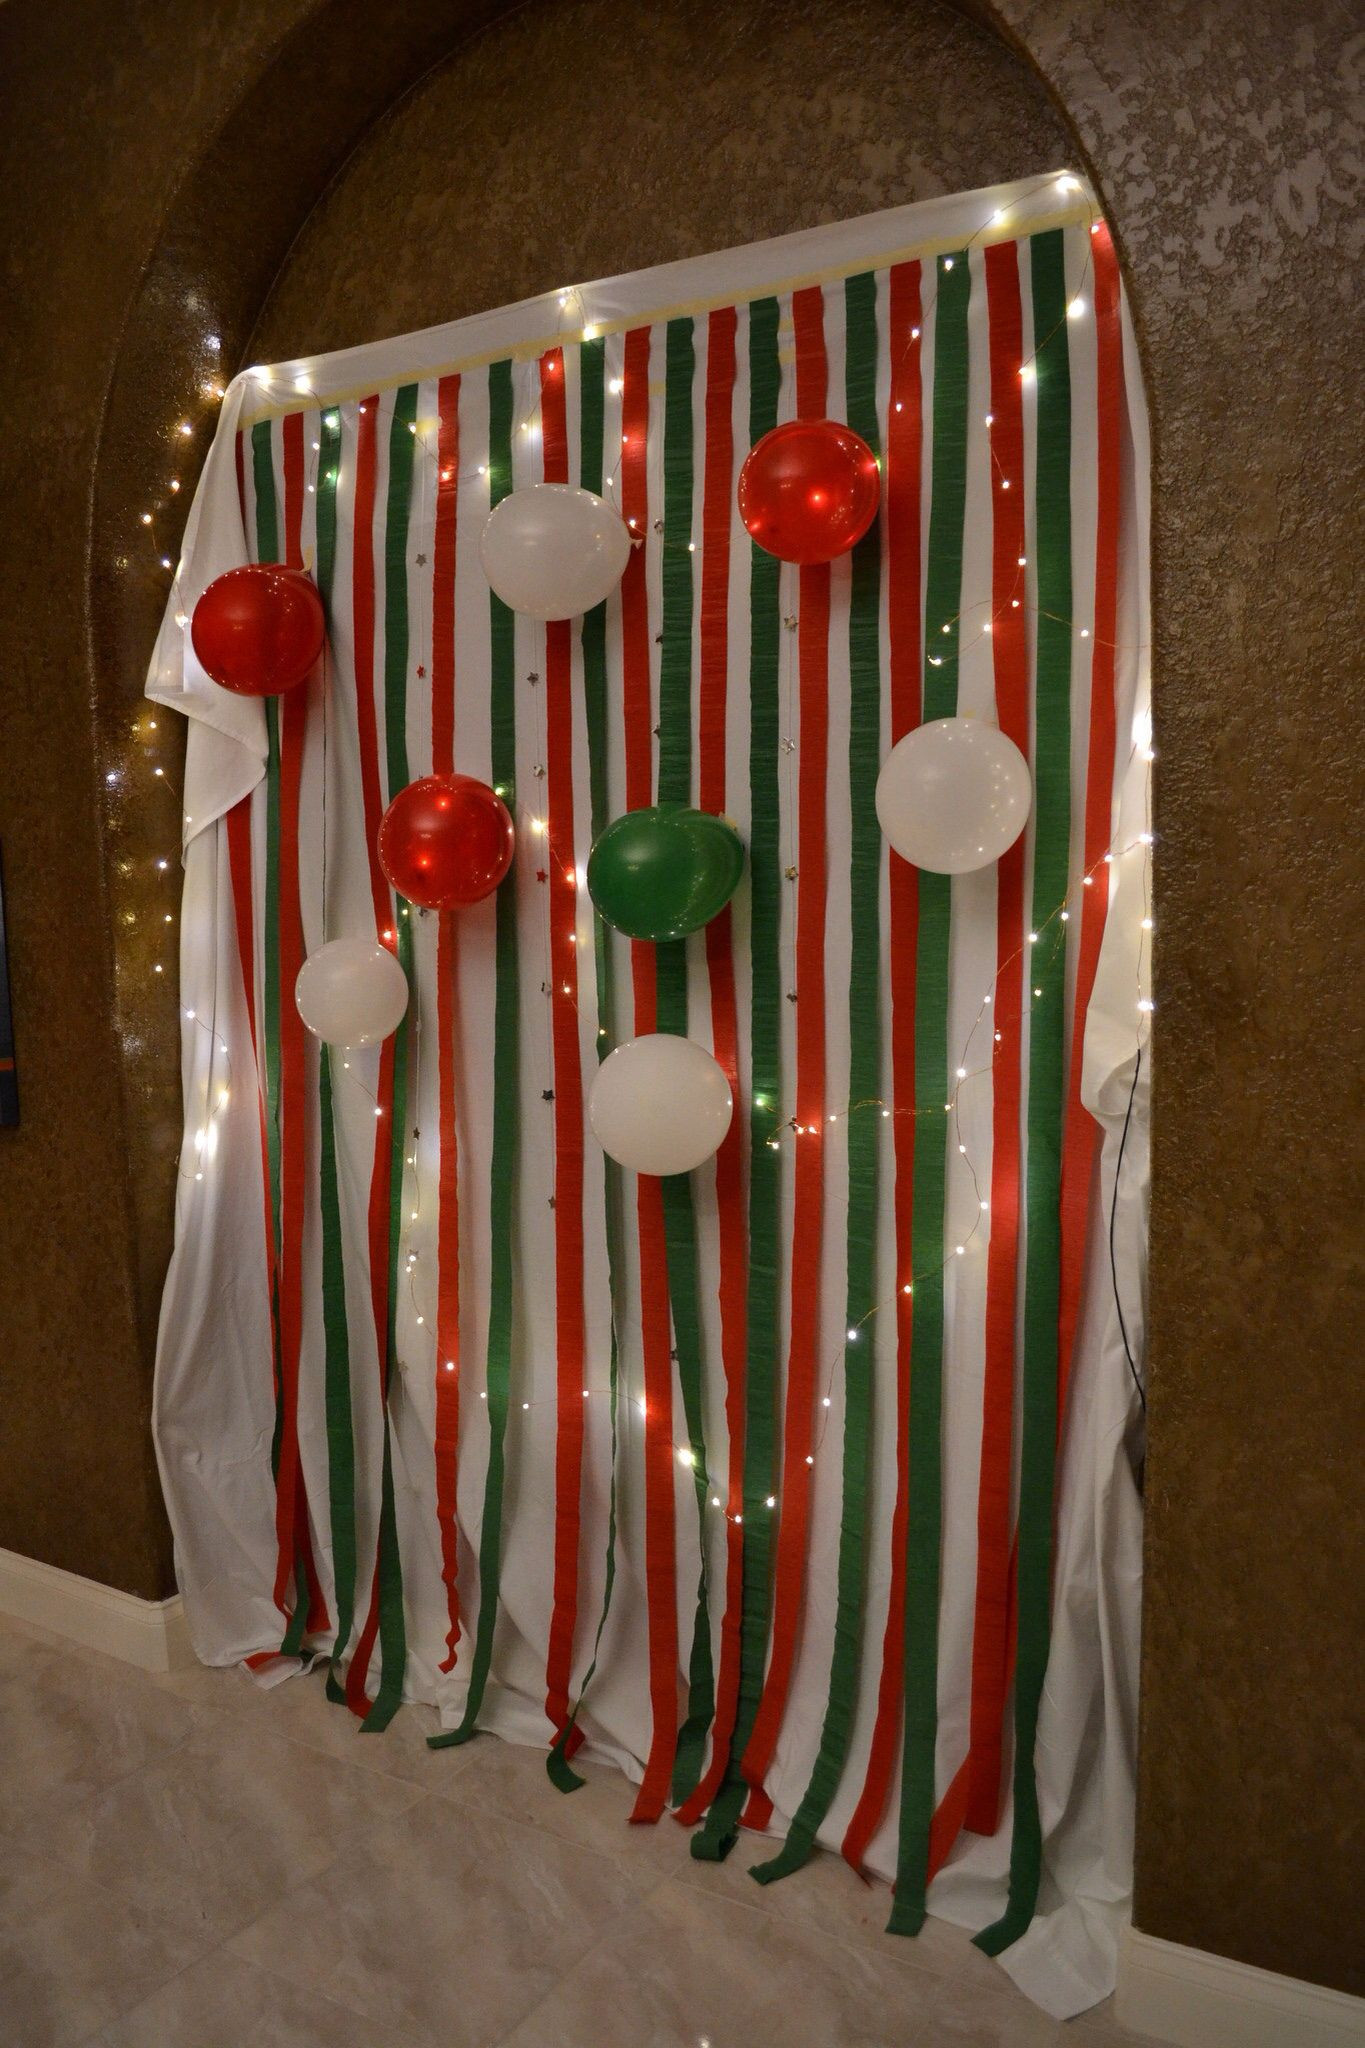 Christmas Party Photo Booth Ideas
 Easy DIY homemade Christmas party photobooth backdrop